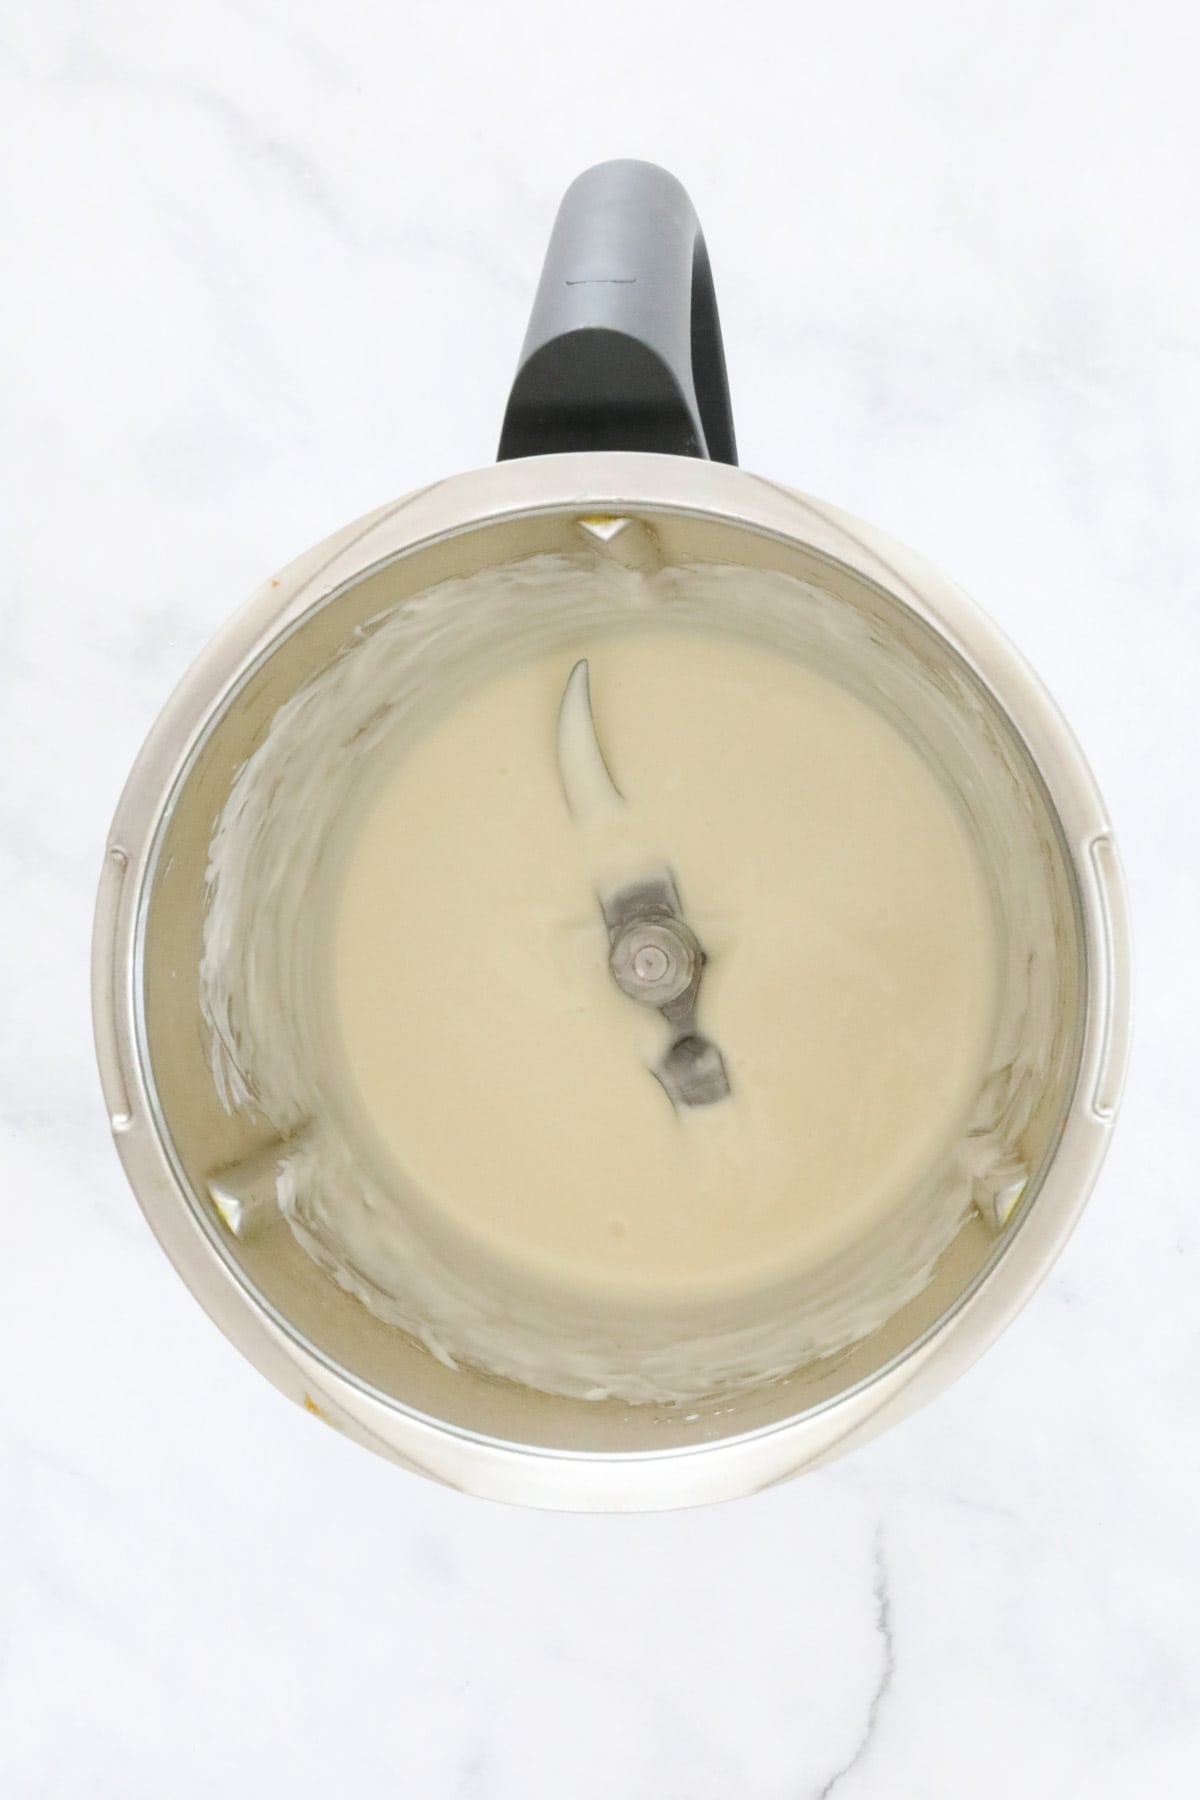 Melted white chocolate in a Thermomix.